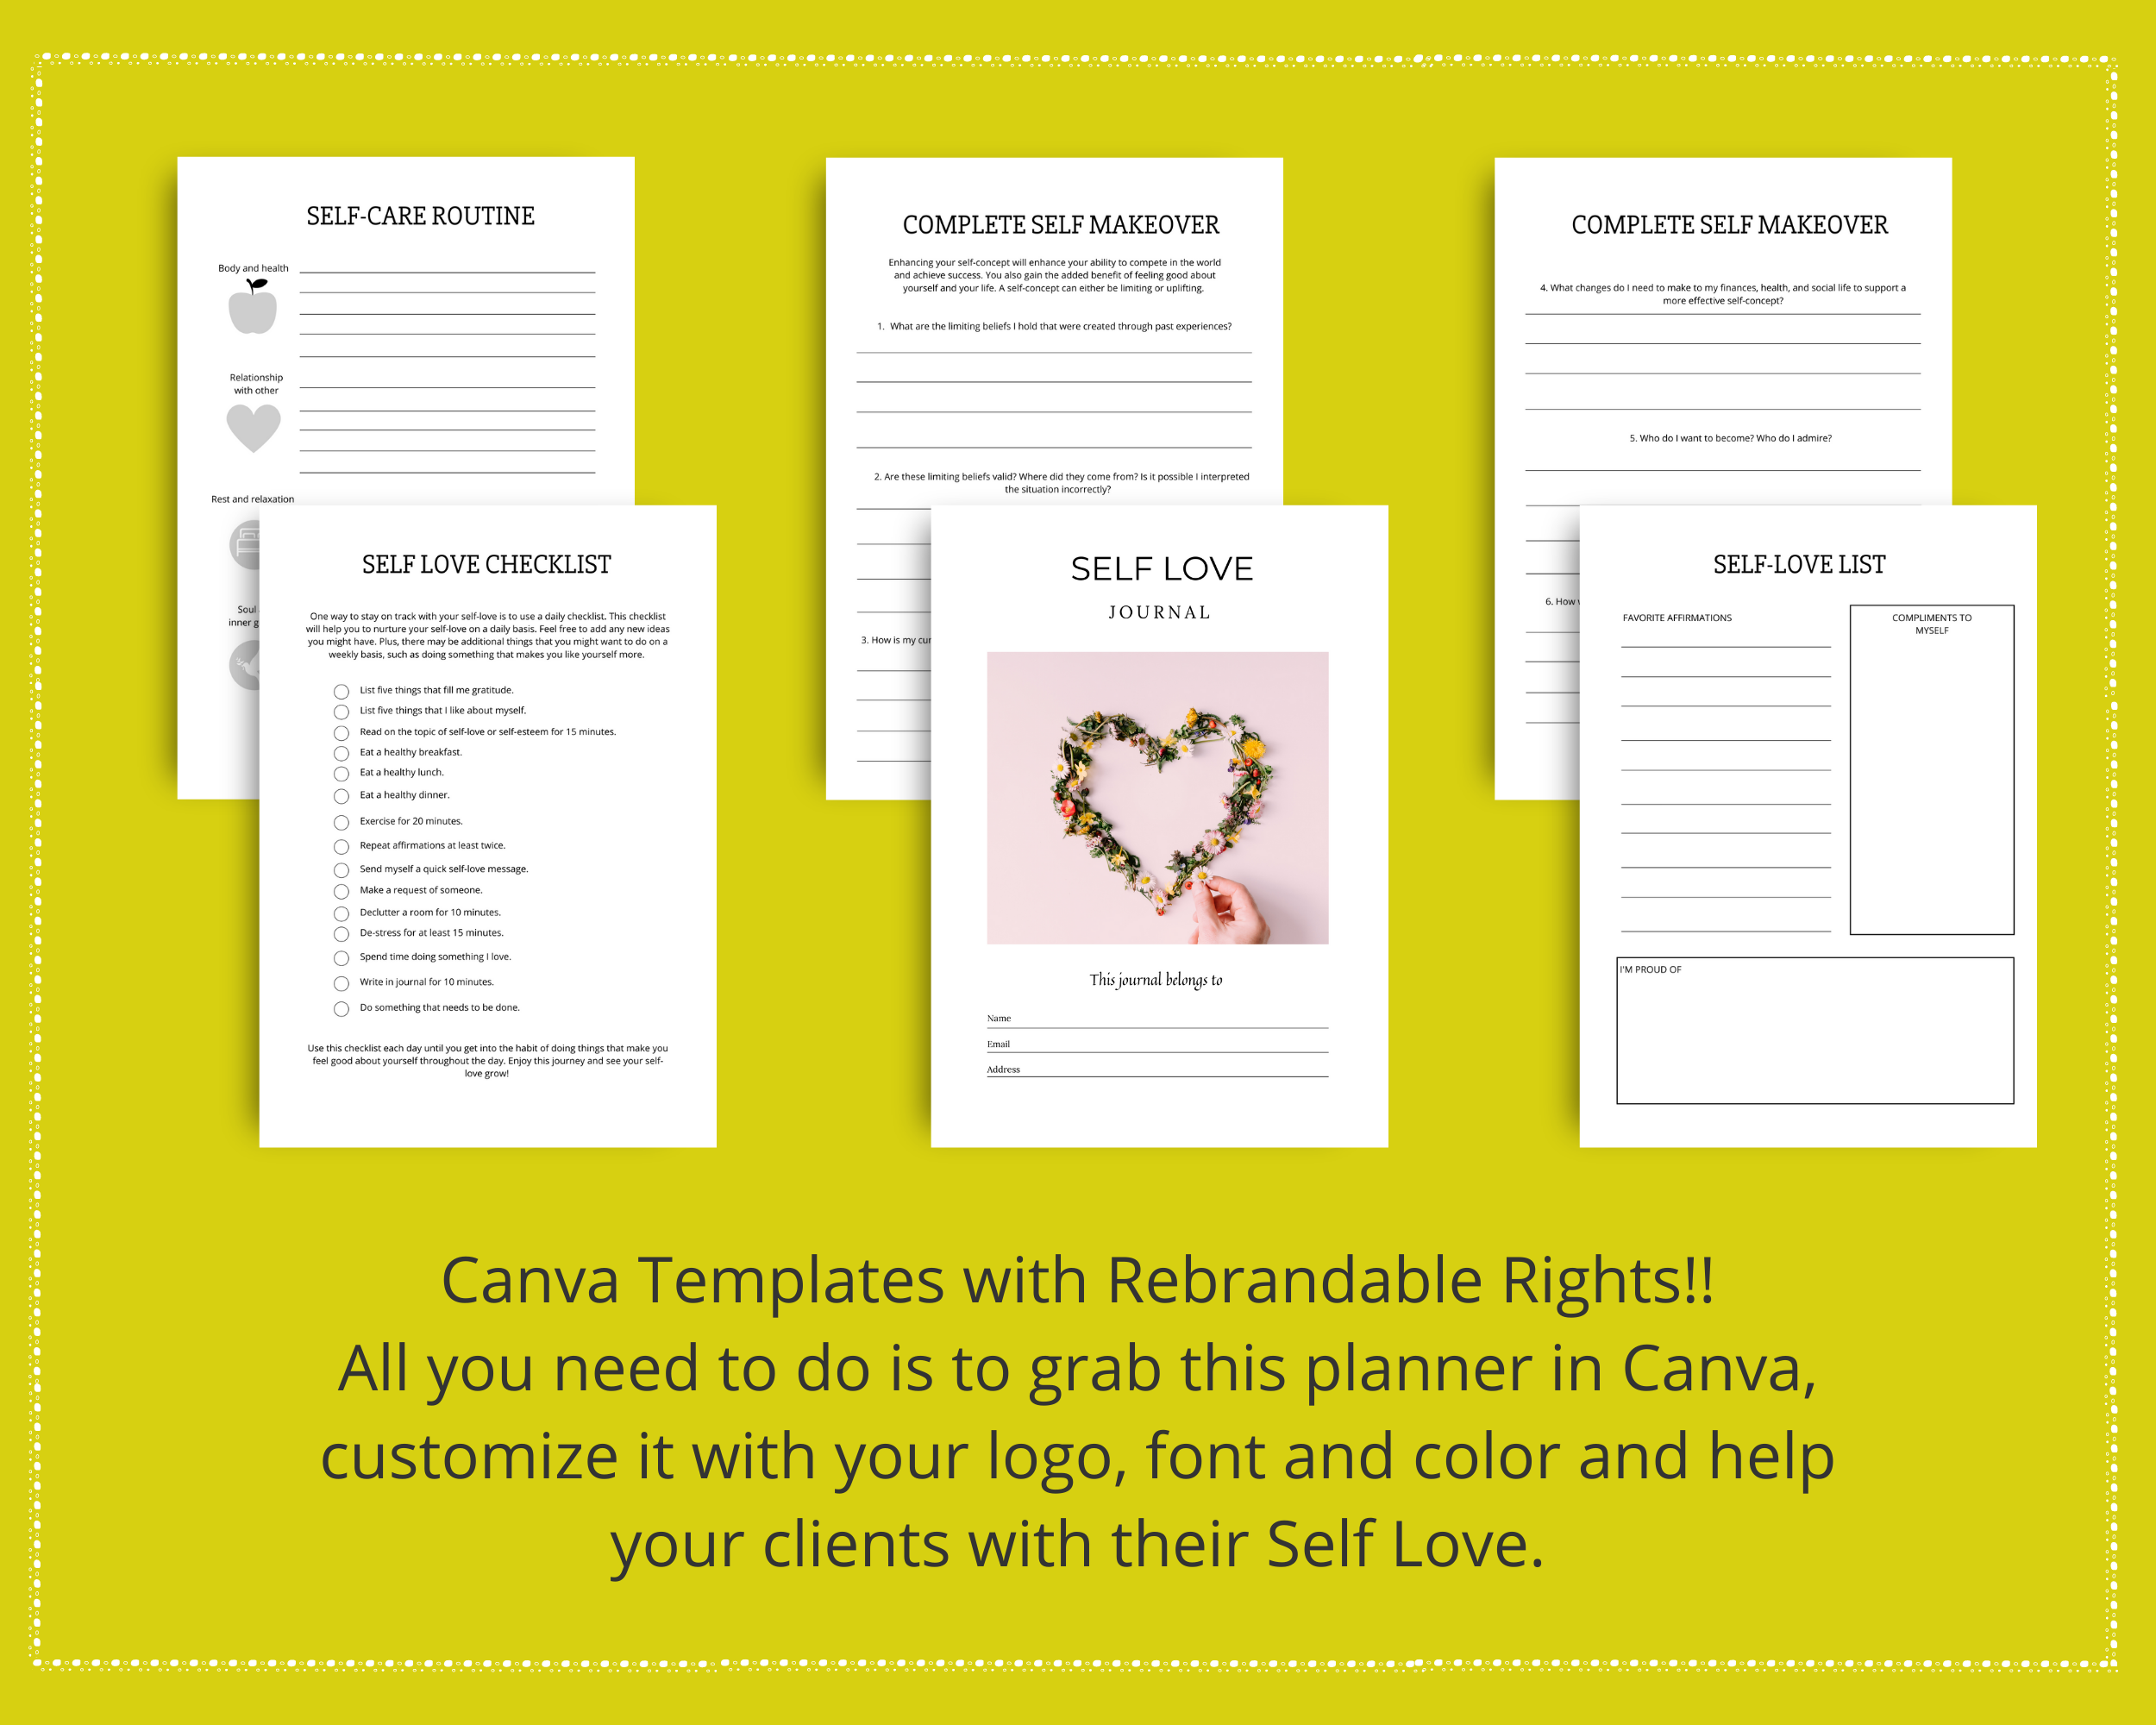 Editable Self Love Journal in Canva | Commercial Use